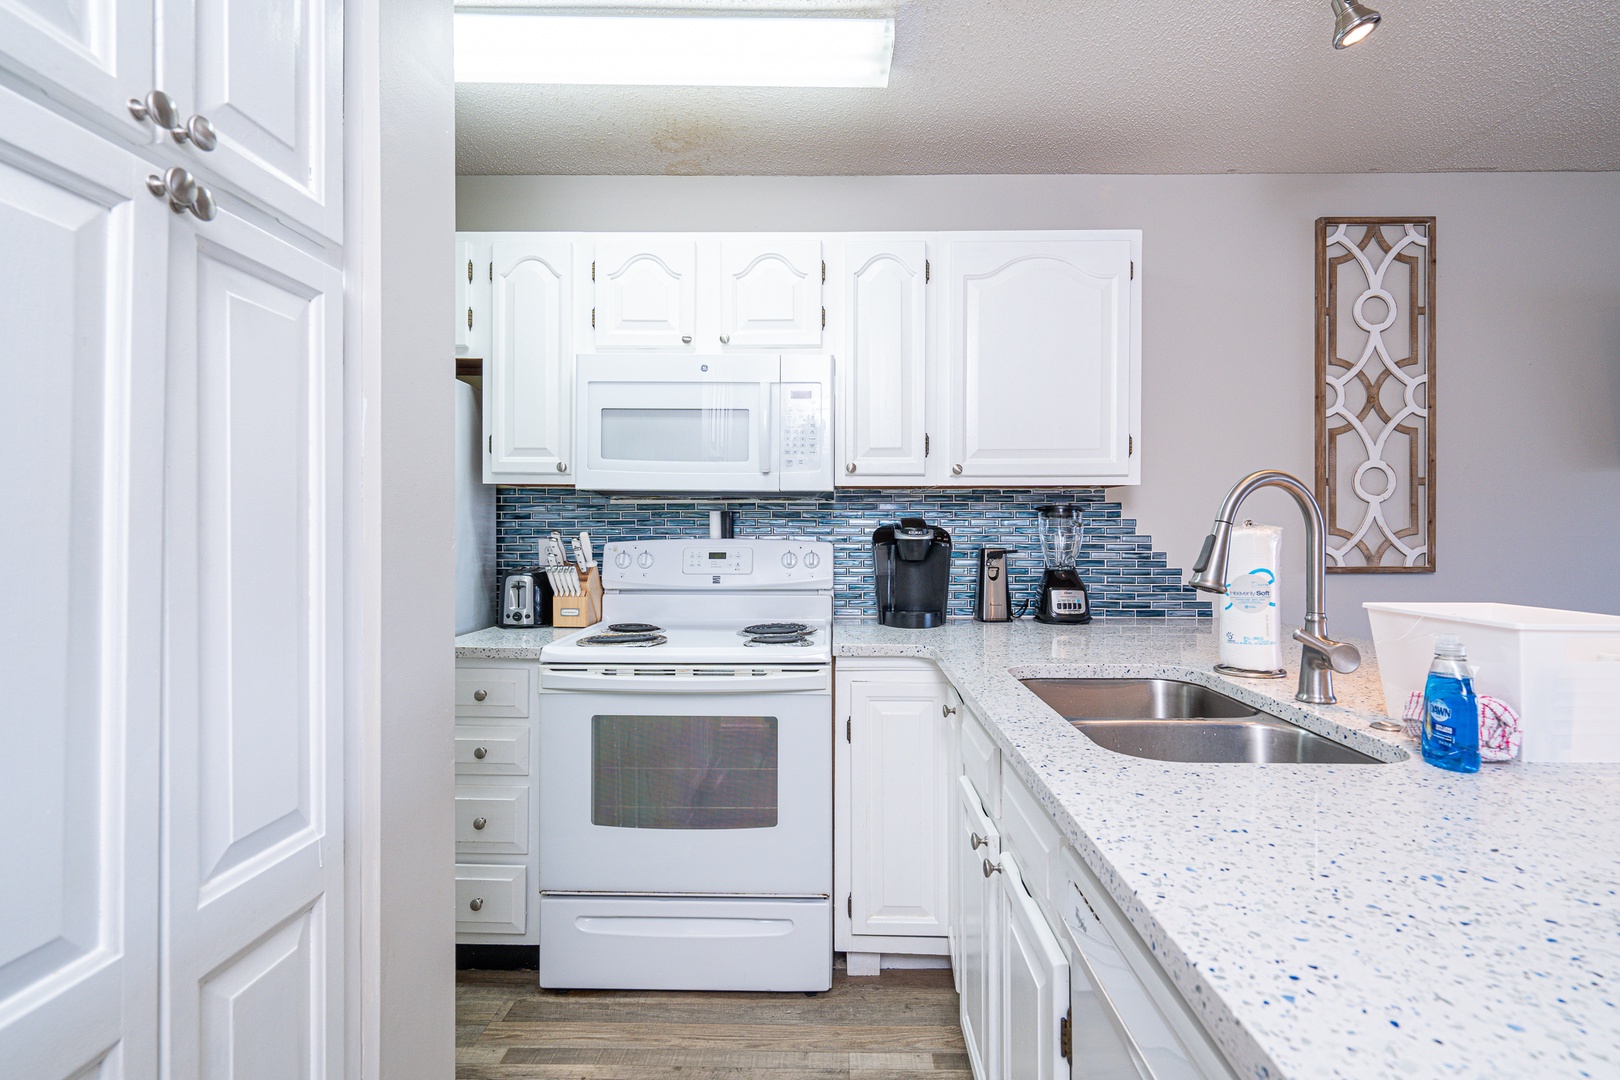 The open kitchen offers ample storage space & all the comforts of home